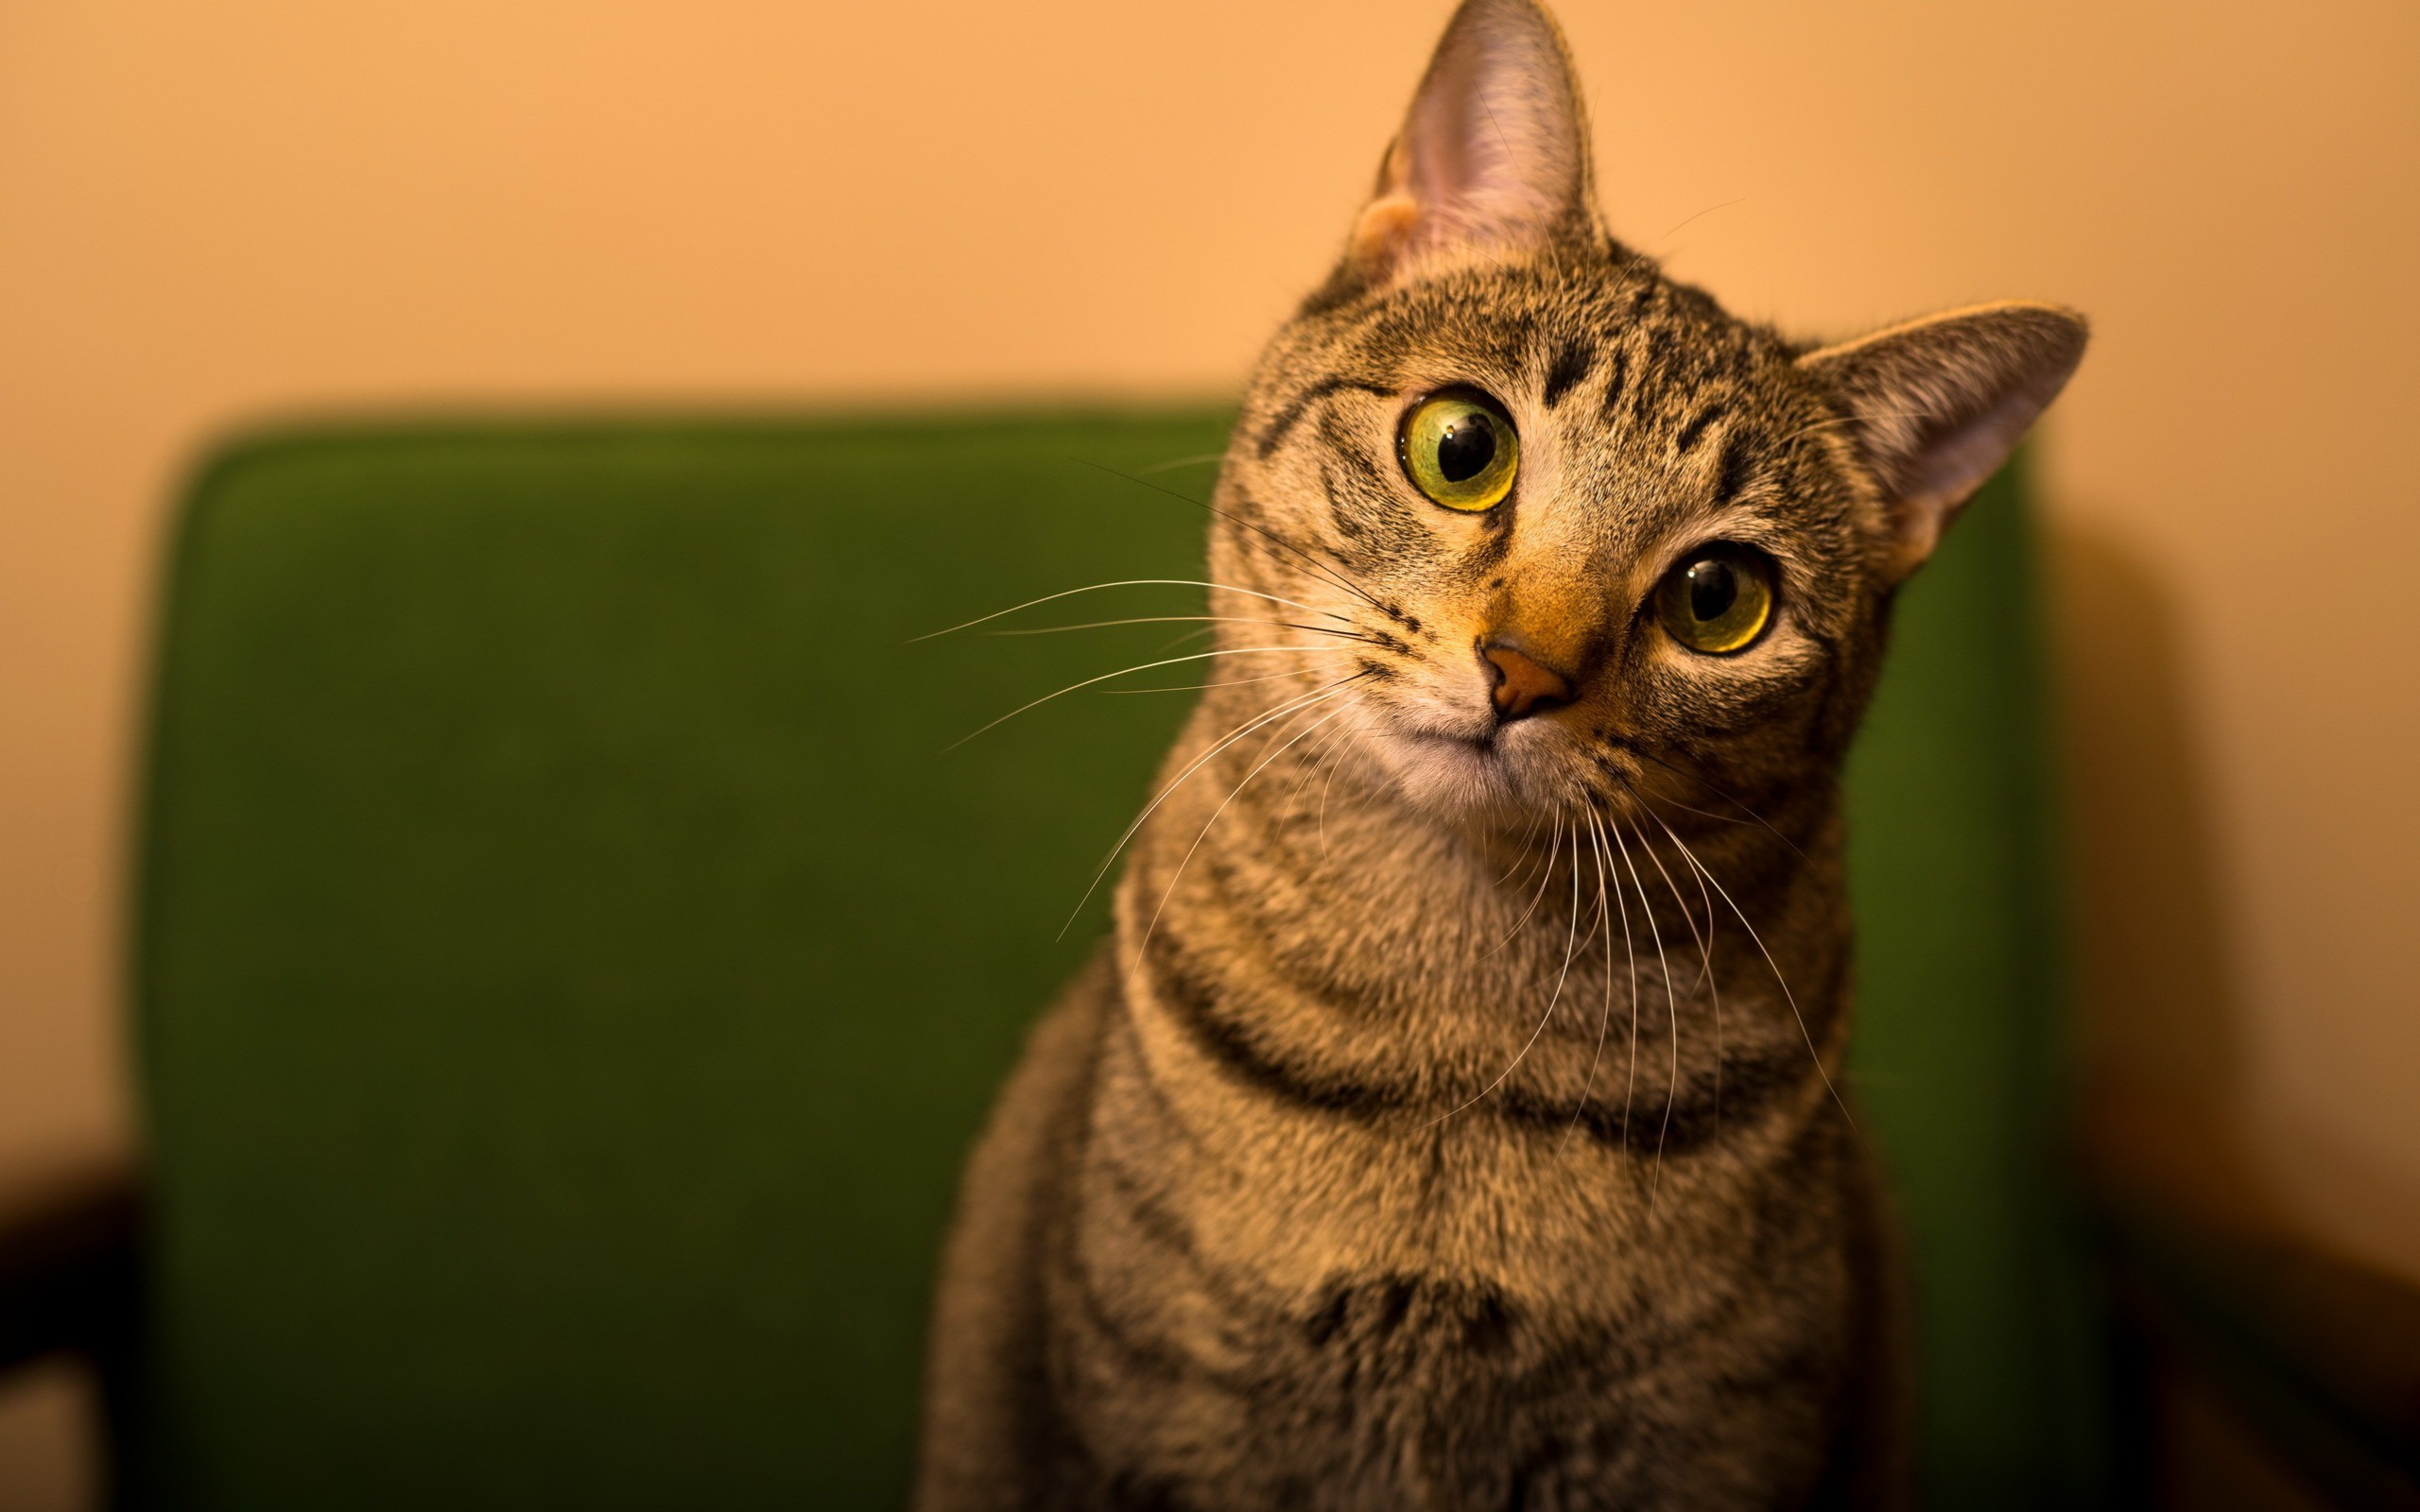 Wallpaper, animals, depth of field, green eyes, whiskers, fauna, 2560x1600 px, vertebrate, close up, cat like mammal, small to medium sized cats, tabby cat, domestic short haired cat, bengal, european shorthair